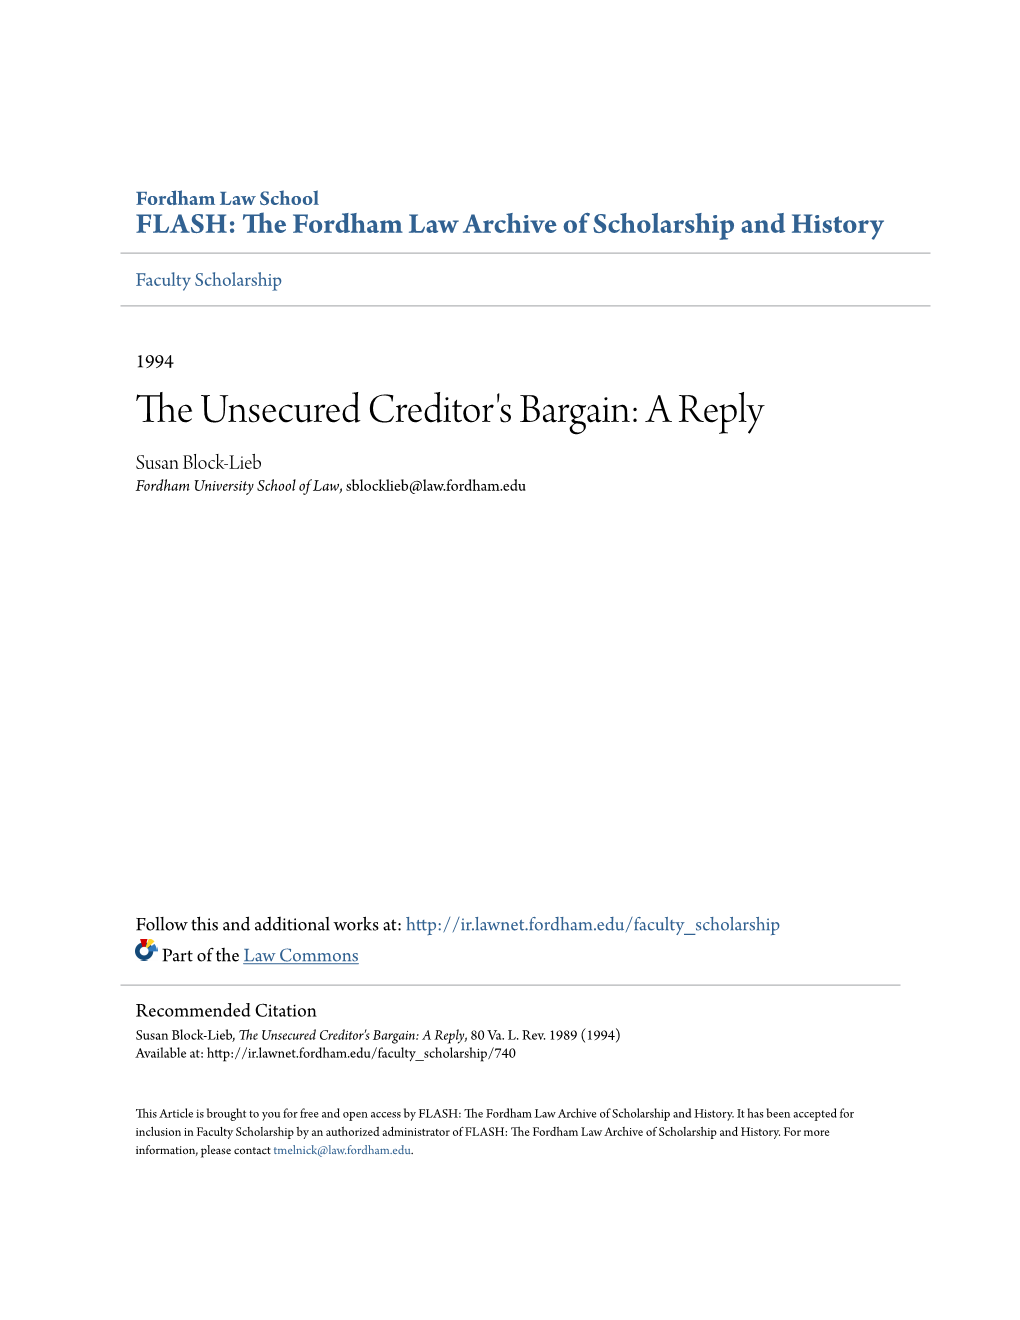 The Unsecured Creditor's Bargain: a Reply, 80 Va